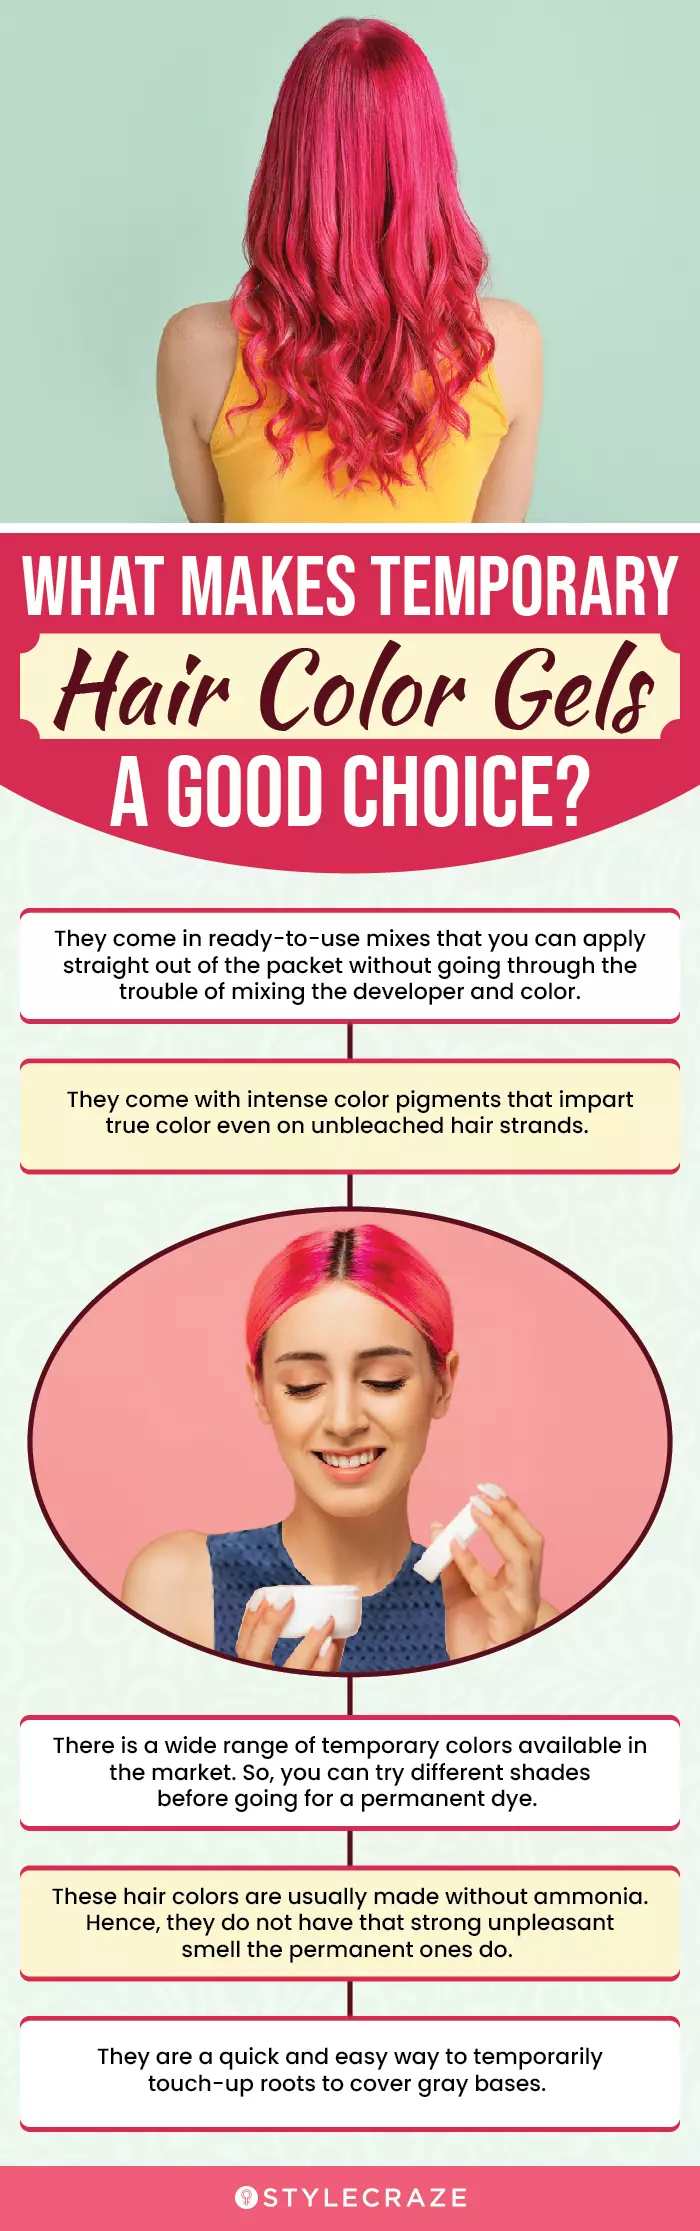 What Makes Temporary Hair Color Gels A Good Choice? (infographic)